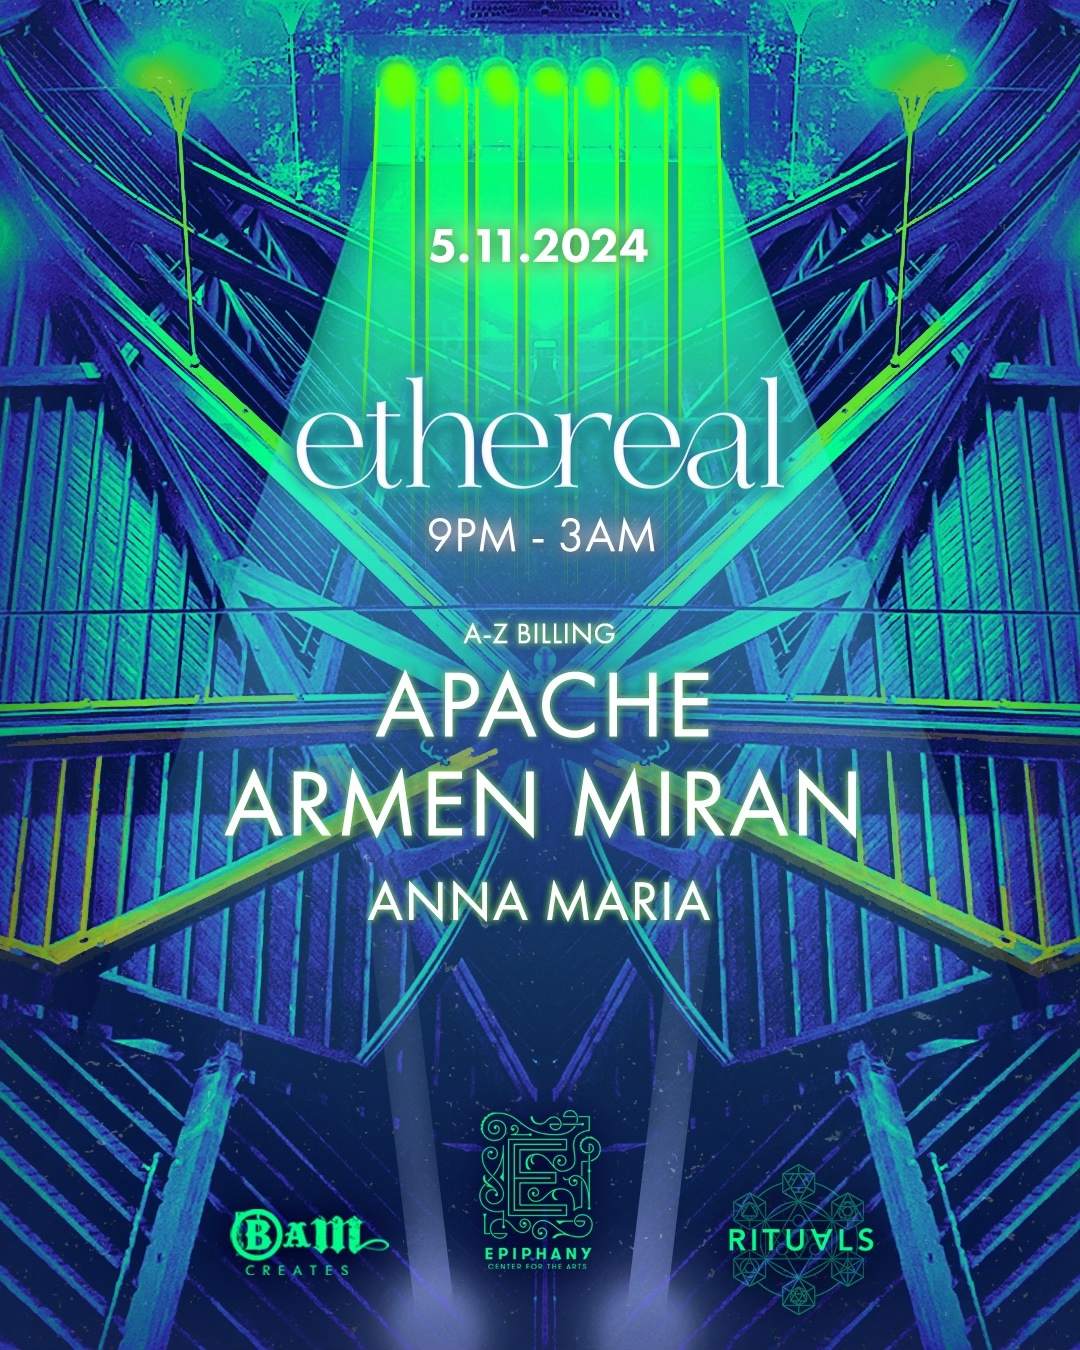 Ethereal with Apache + Armen Miran + Anna Maria - フライヤー表